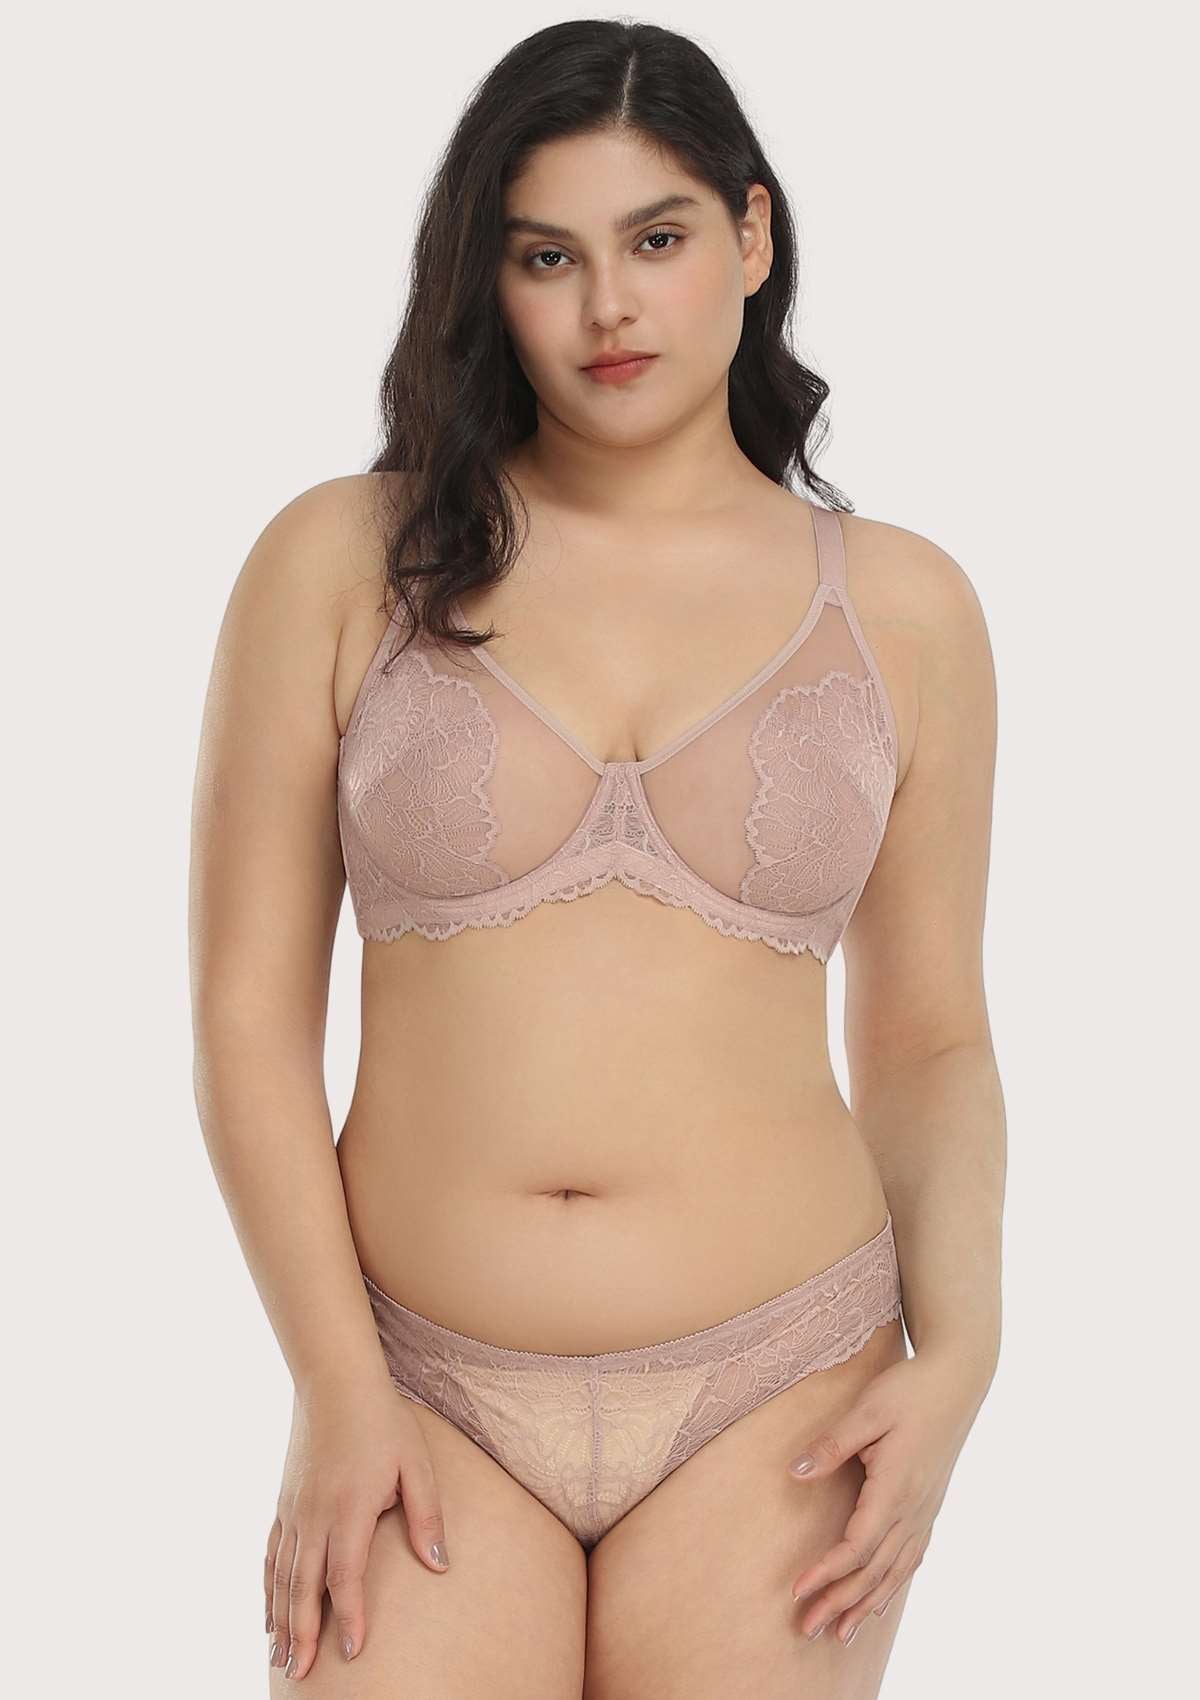 HSIA Blossom Lace Bra And Panties Set: Best Bra For Large Busts - Dark Pink / 46 / DD/E